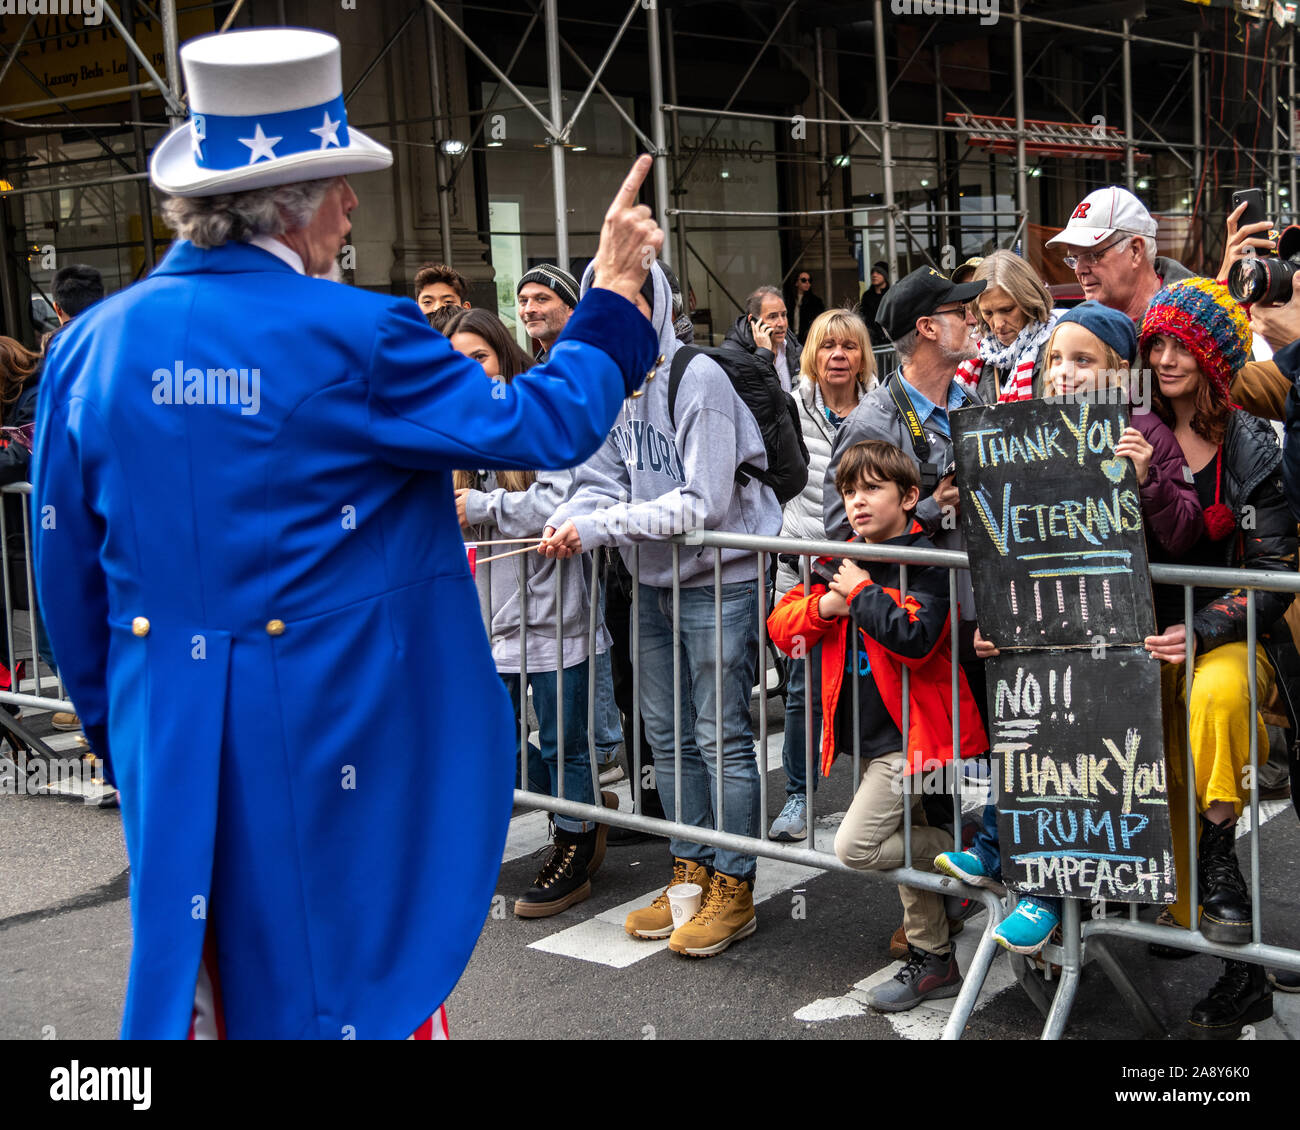 New York, USA,   11 November 2019.  An Uncle Sam impersonator interacts with public displaying anti-Trump signs at the Veterans Day Parade in New York City.  Credit: Enrique Shore/Alamy Live News Stock Photo